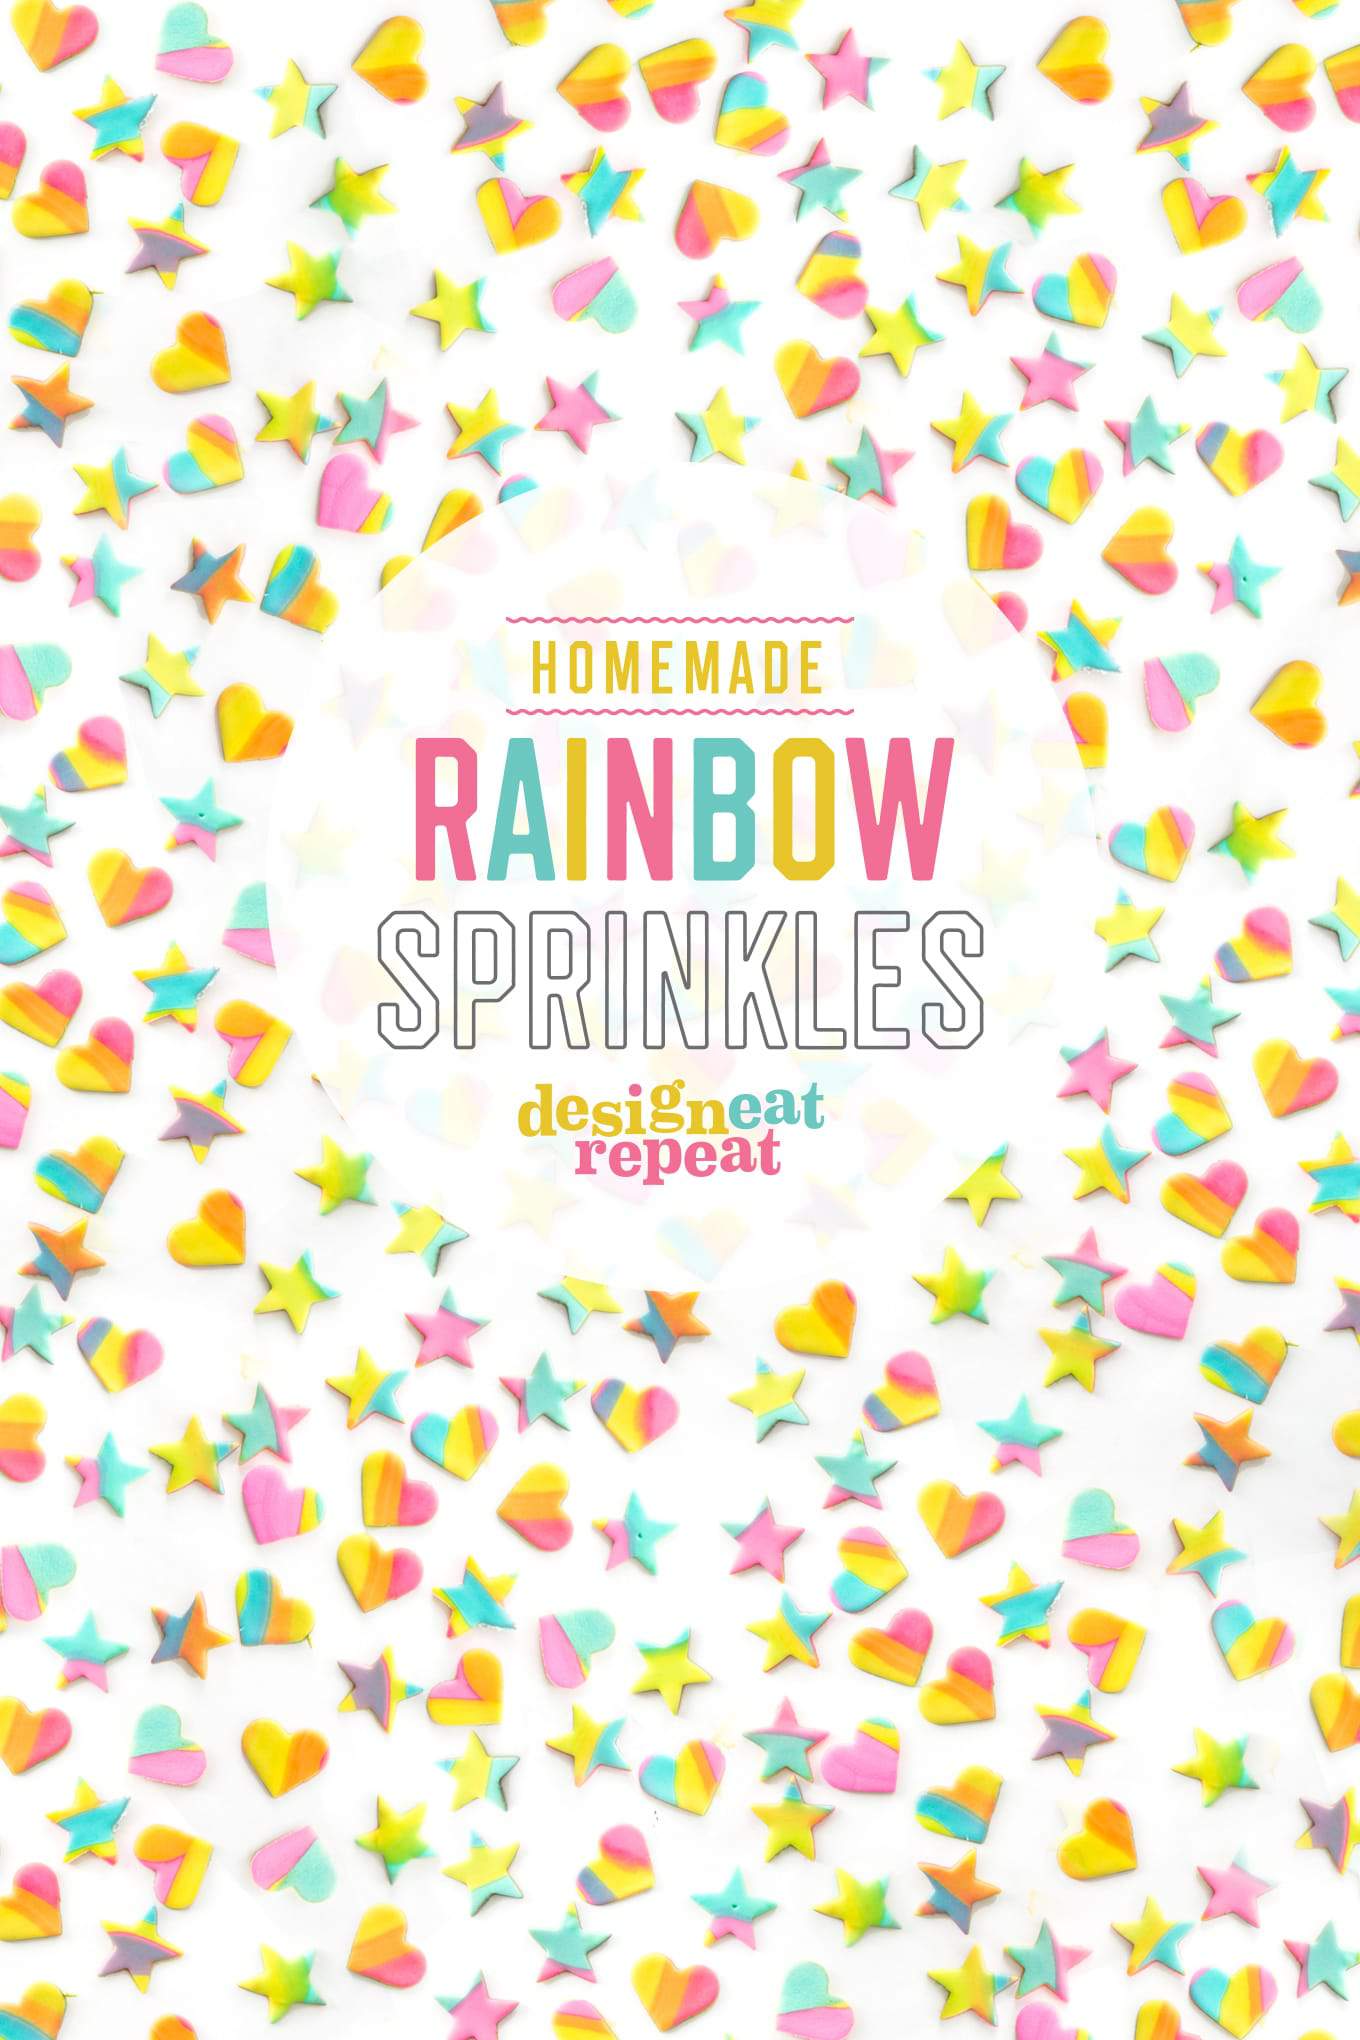 Learn how to make these EASY homemade rainbow sprinkles! Perfect way to turn any baked creation into a colorful treat!